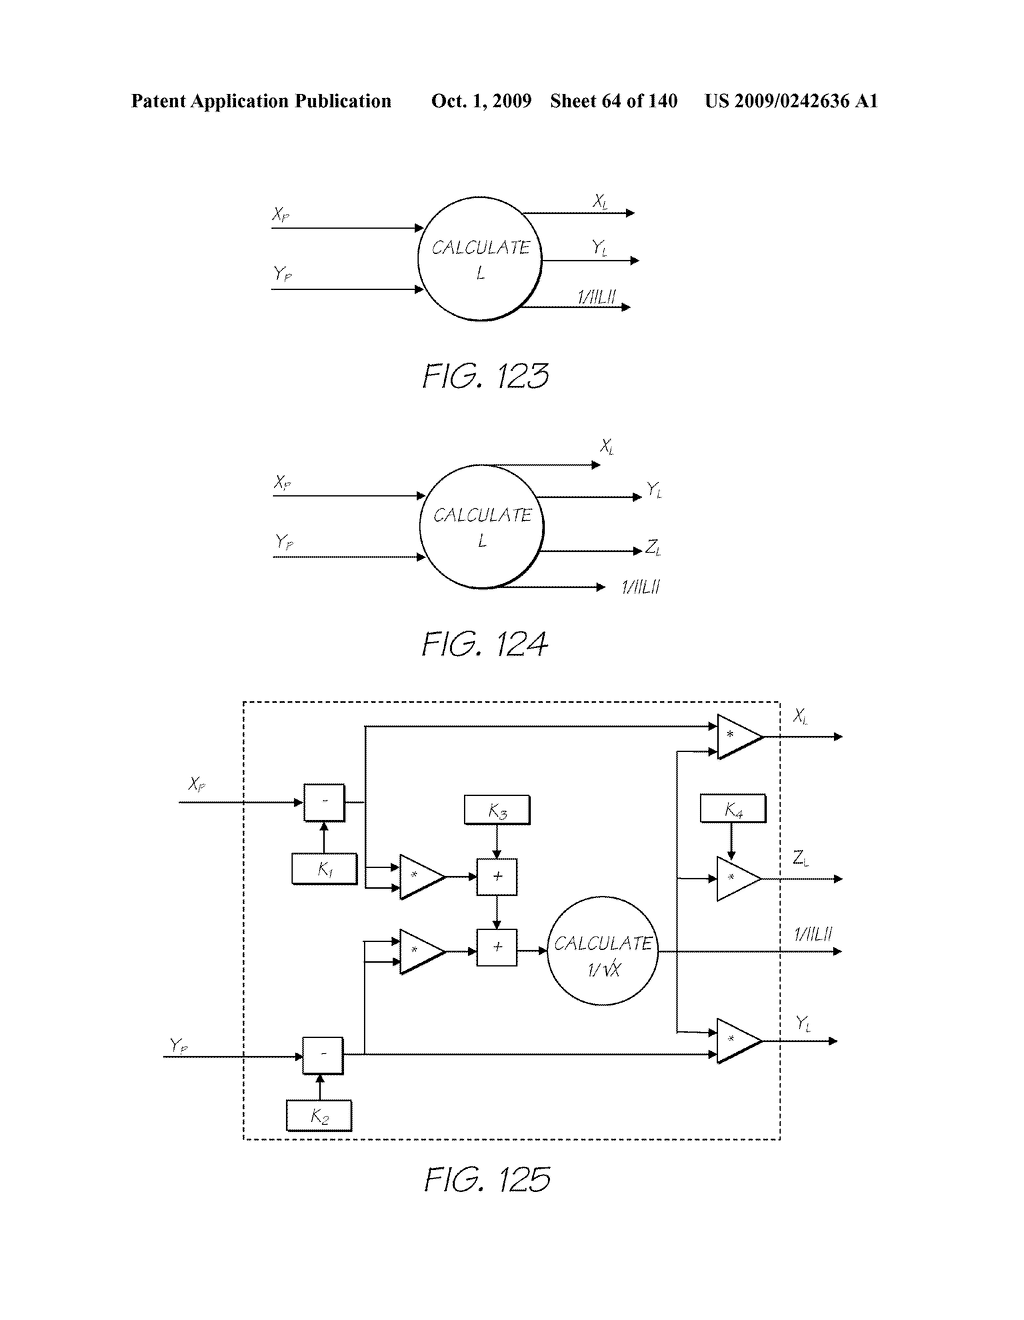 PROCESSOR FOR A PRINT ENGINE ASSEMBLY HAVING POWER MANAGEMENT CIRCUITRY - diagram, schematic, and image 65